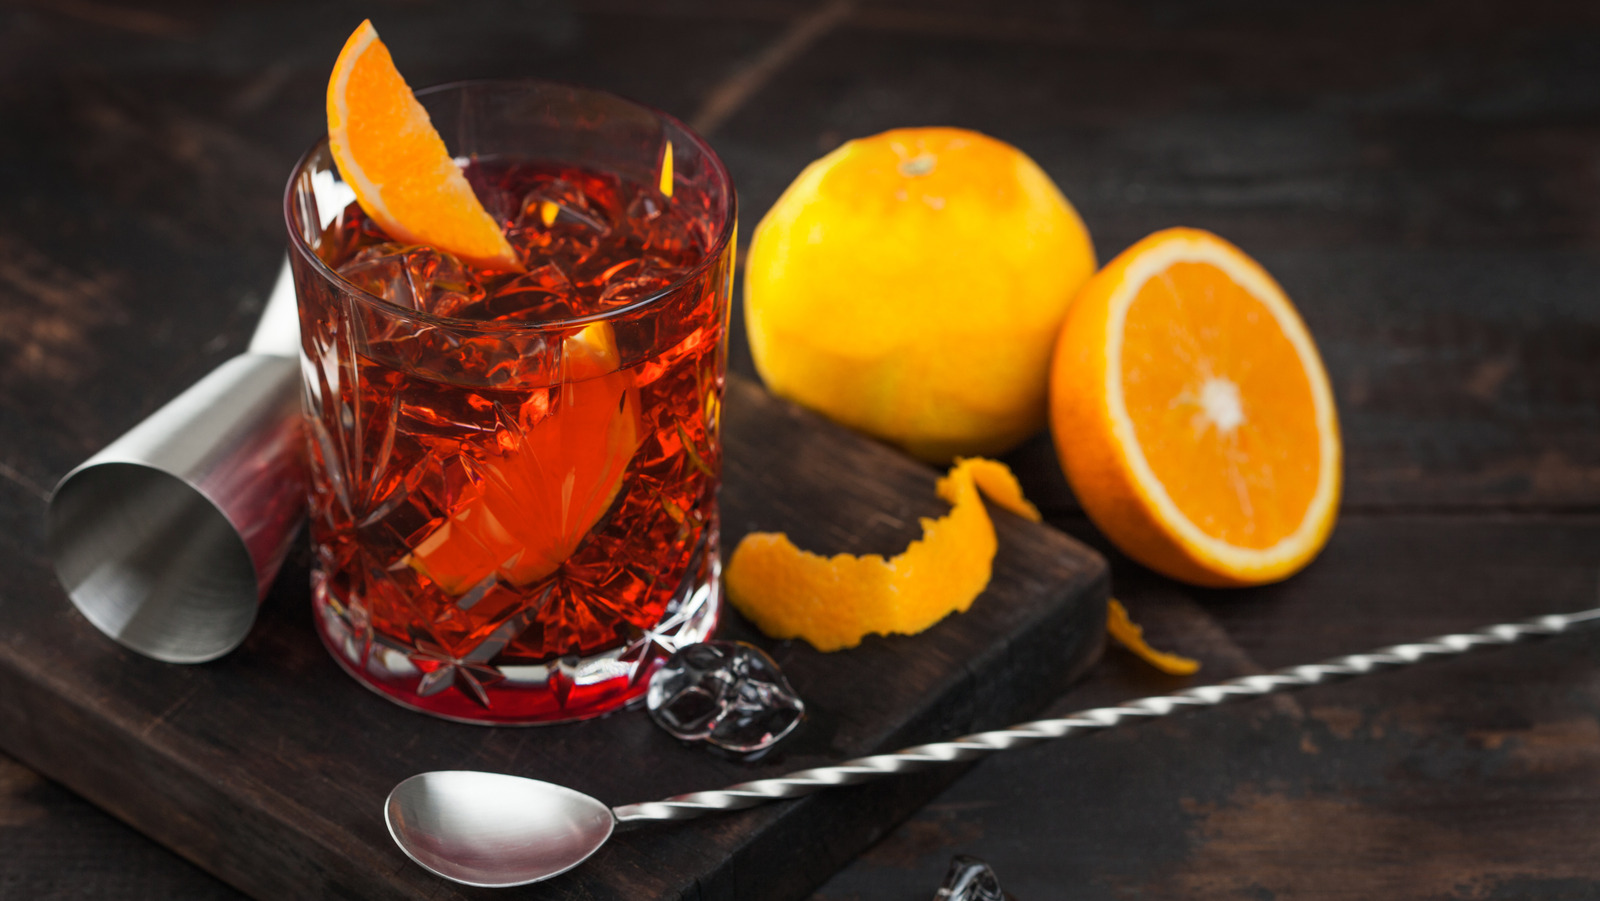 Your Negroni will taste much better with coffee ice cubes